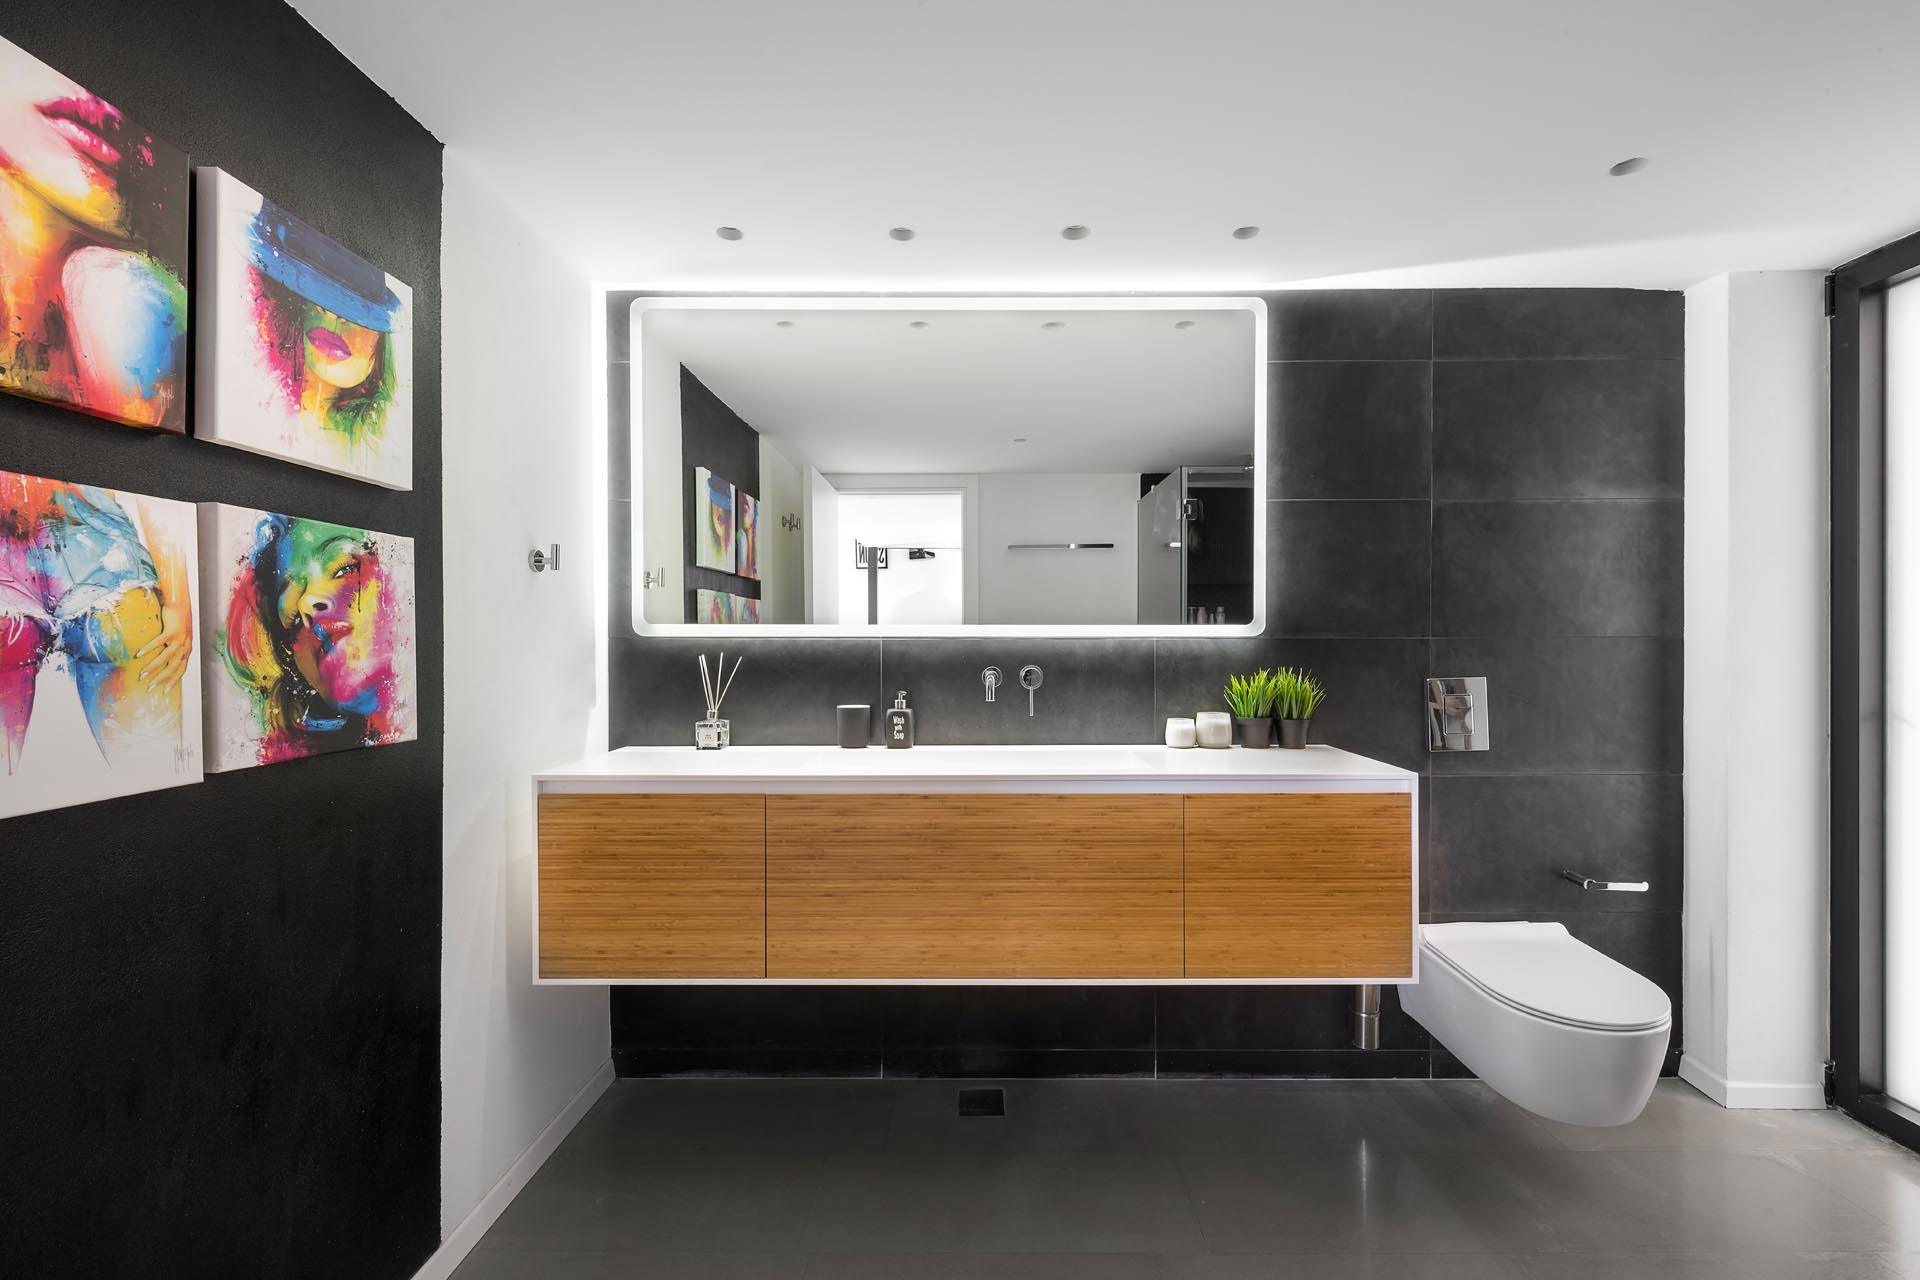 A modern bathroom with black accent wall, large gray tiles, a floating vanity, and a mirror with LED lighting.